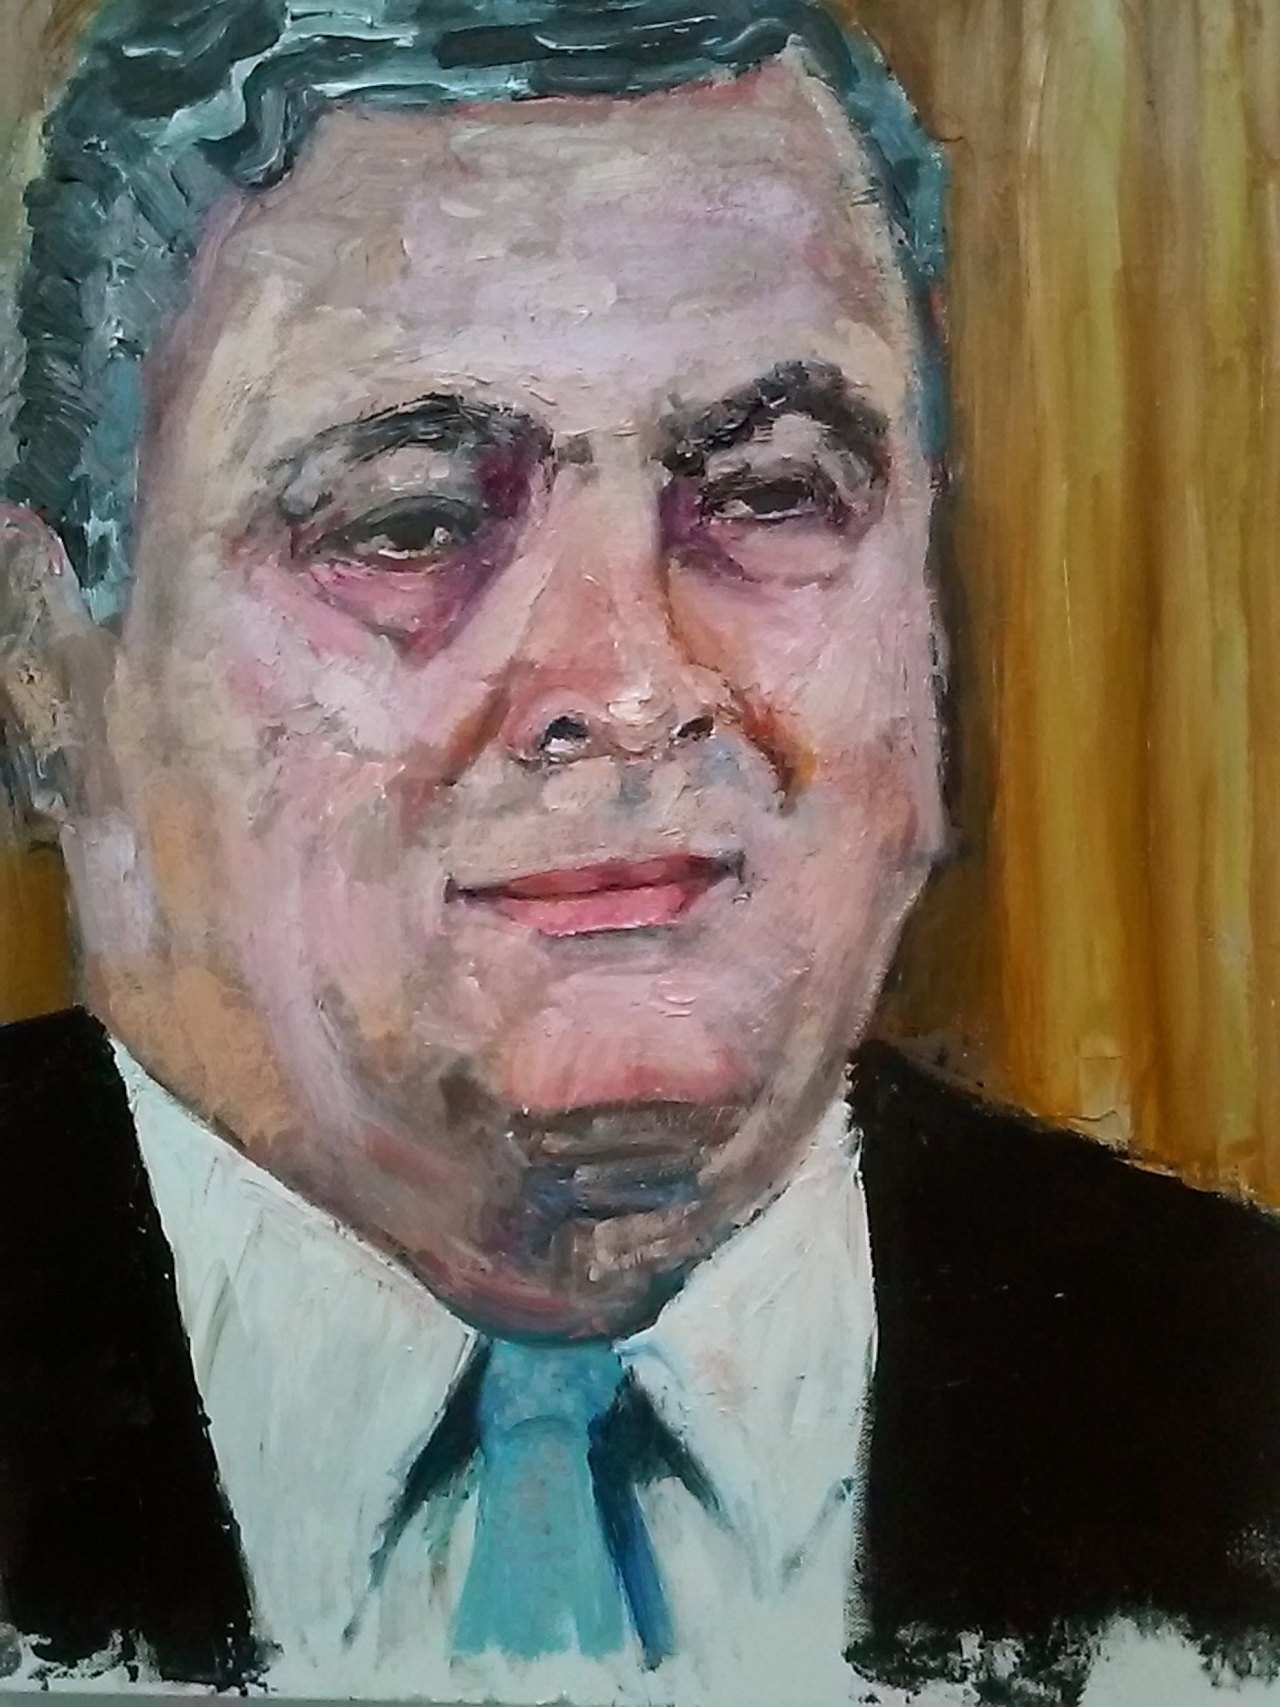 He Denies Death by Torture, 18x24, oil on canvas, Sandra Koponen © 2015 Central Intelligence Agency (CIA)George Tenet, Director of Central IntelligenceJul. 11, 1997 - Jul. 11, 2004Tenet led the CIA when it established secret prisons overseas and tortured its prisoners using &ldquo;enhanced interrogation techniques,&rdquo; such as waterboarding. Beginning in early 2002, Tenet met with the National Security Council Principals Committee to obtain approval for the CIA&rsquo;s use of specific interrogation techniques on each of the so-called &ldquo;high value&rdquo; detainees. Tenet reportedly gave detailed descriptions and photographs of the techniques to the Principals Committee, which included Vice President Dick Cheney, Secretary of Defense Donald Rumsfeld, and National Security Adviser Condoleezza Rice. Tenet signed written interrogation plans and conditions of confinement guidelines that authorized the CIA to use methods including stress positions, walling, slapping, wall standing, waterboarding, and sleep deprivation. Tenet also repeatedly asked for reaffirmation of the CIA&rsquo;s use of specific interrogation techniques, both from the Principals Committee and from the DOJ&rsquo;s Office of Legal Counsel.***https://www.aclu.org/infographic/infographic-torture-architects